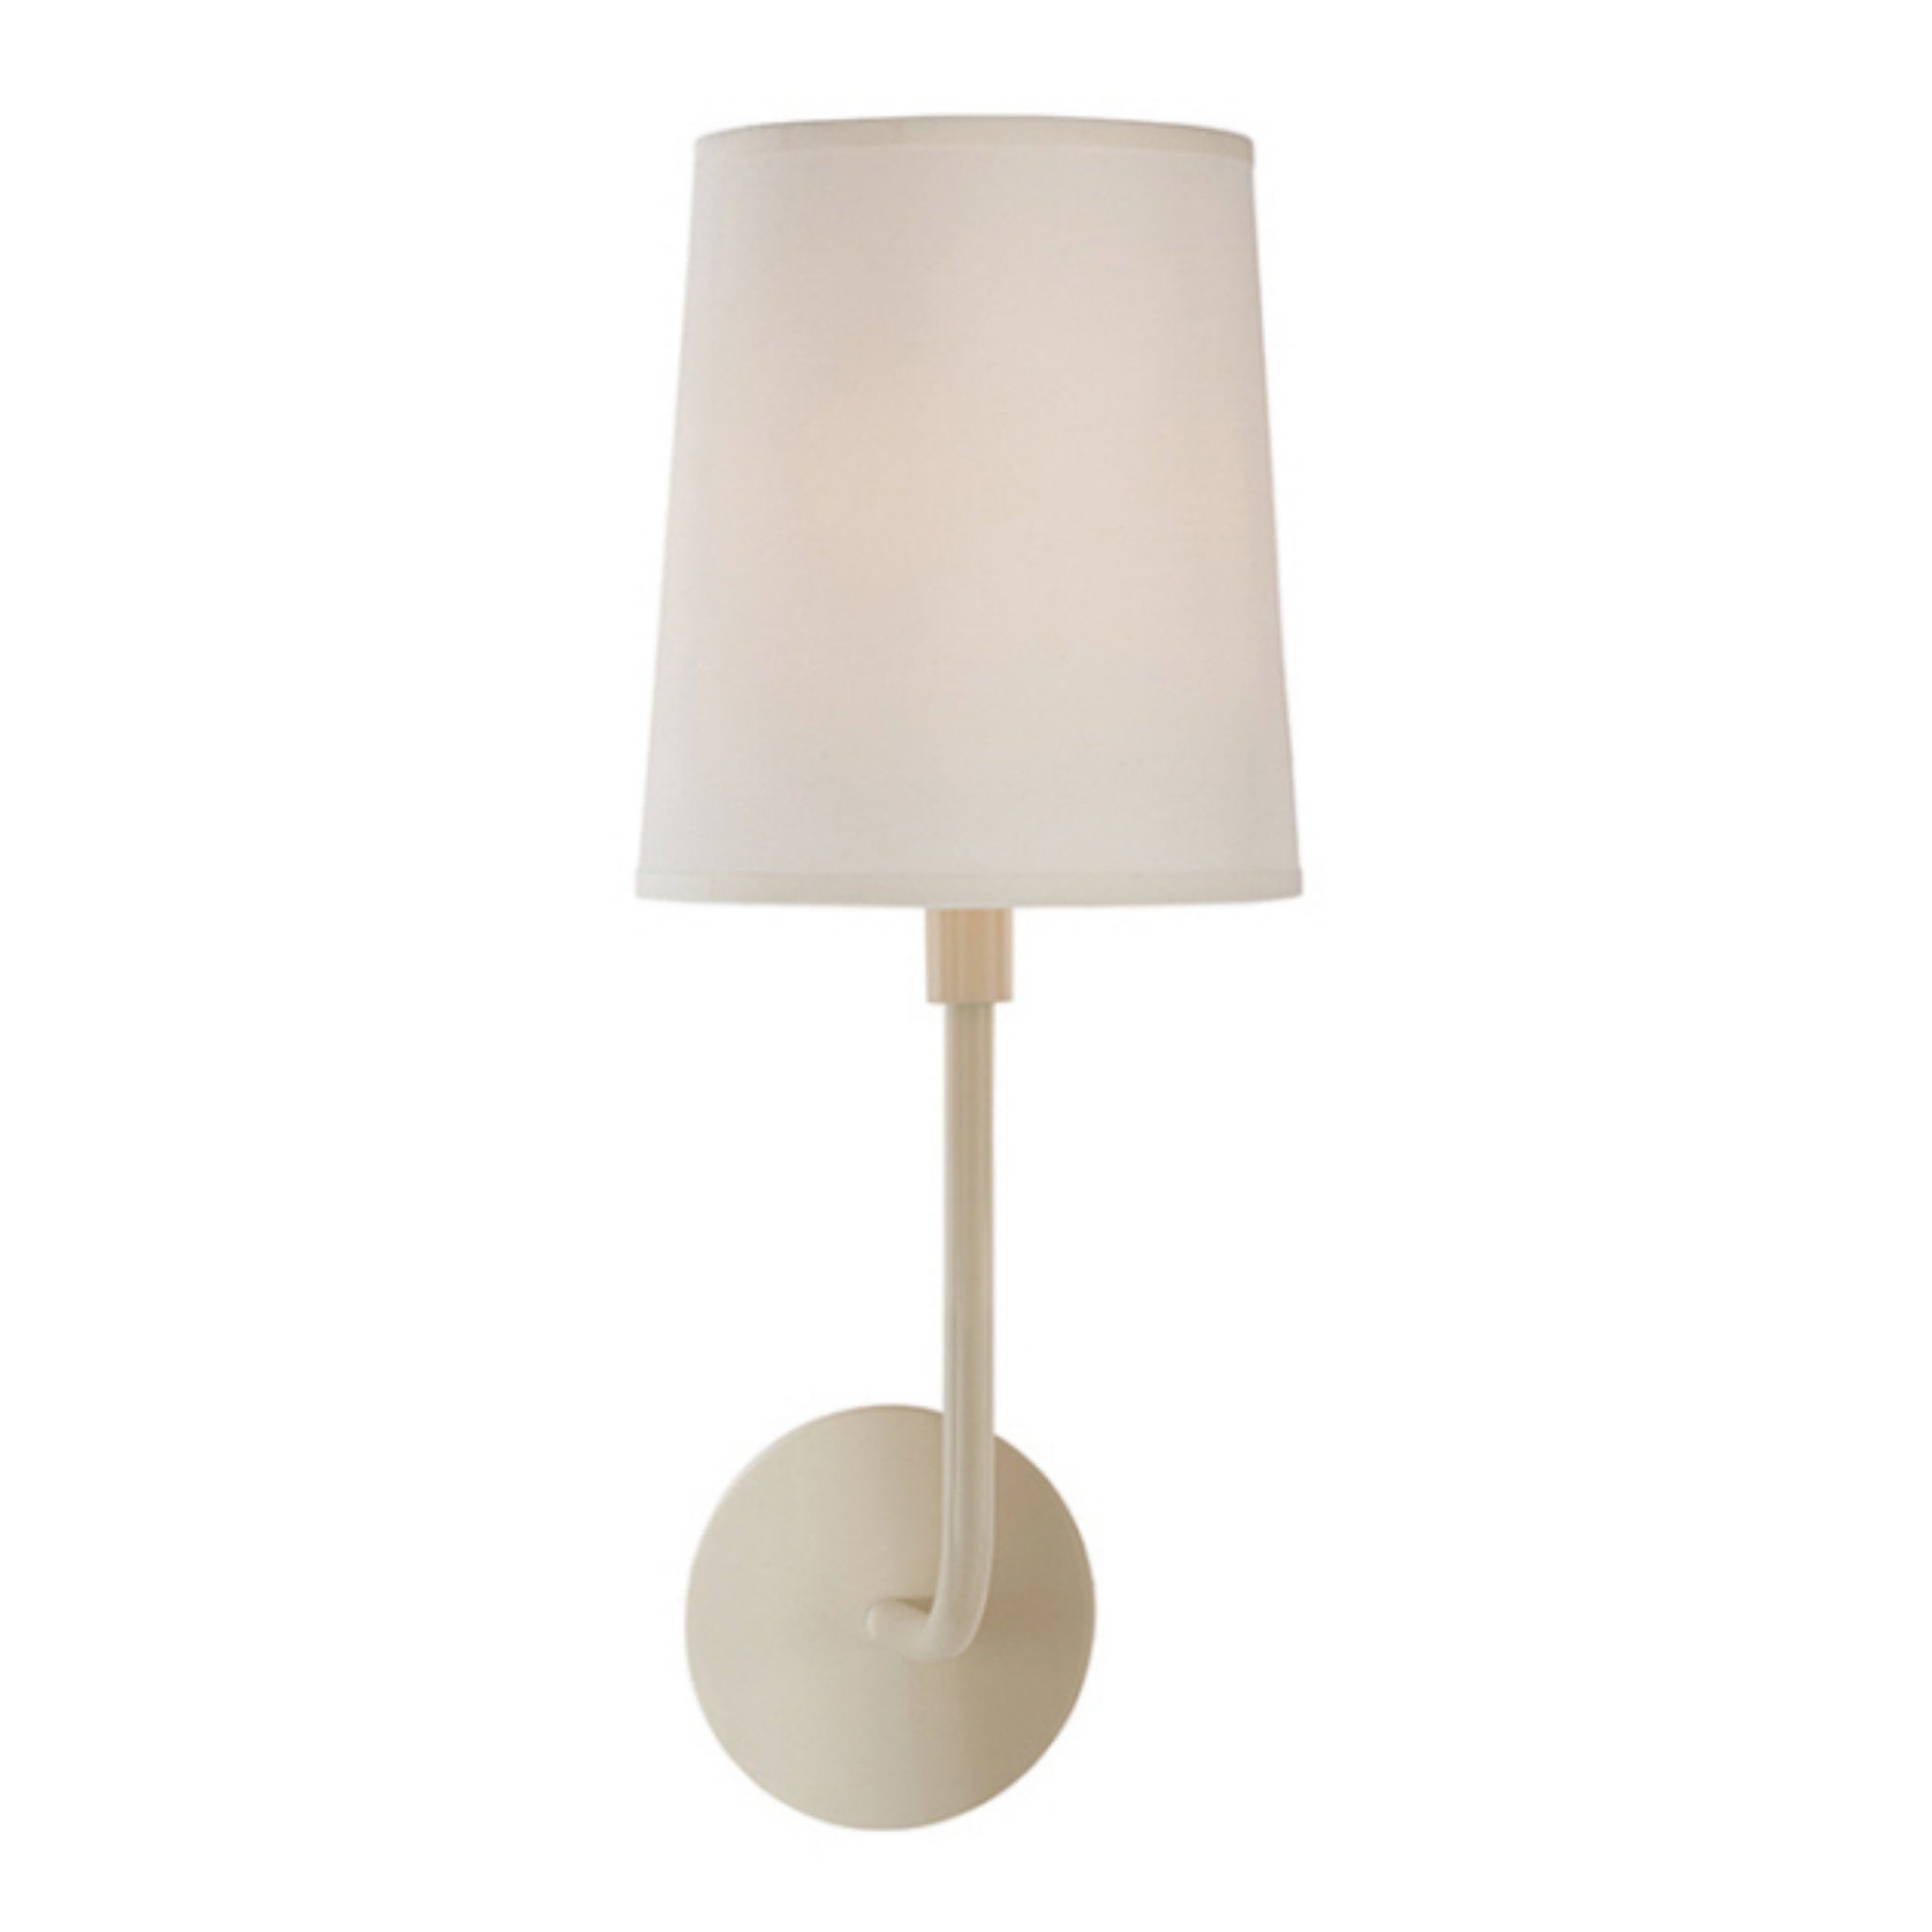 Barbara Barry Go Lightly Sconce in China White with Silk Shade